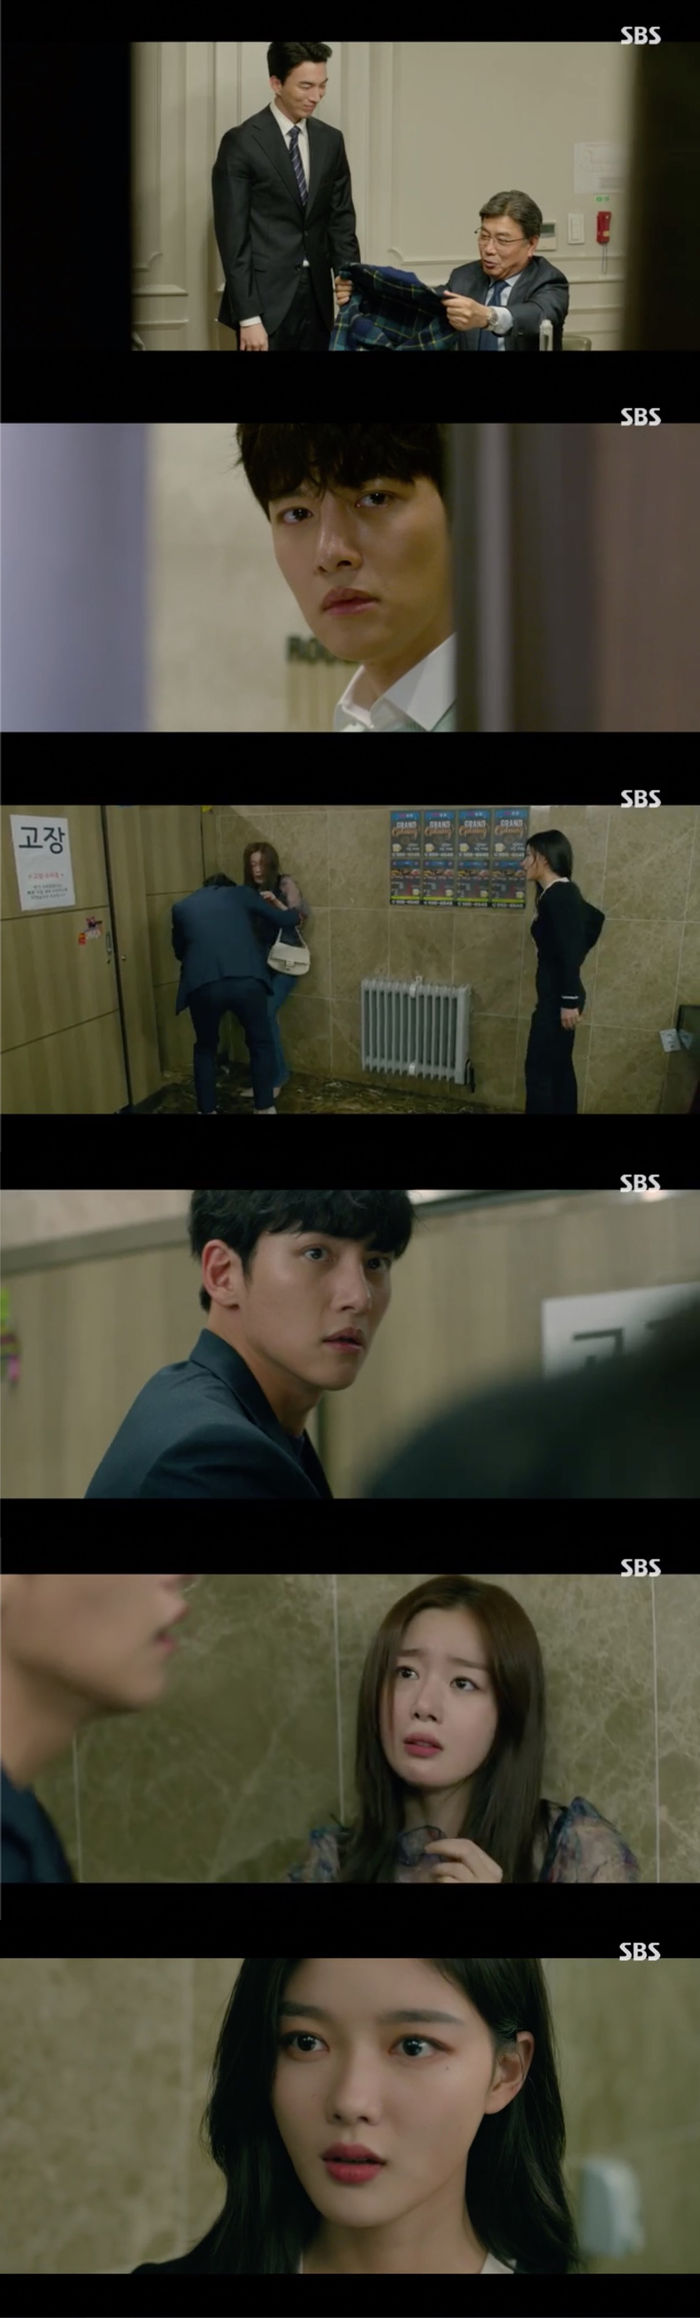  Ji Chang-wook, Kim Yoo-jung, Han Sunhwa three people in one place gathered.On the 26th broadcast of SBS Gold review drama convenience store planetin doesnt mean that three characters face as Choi Dae-heon(Ji Chang-wook minutes), flexible Princess(Han Sunhwa minutes), the information included a Gore by(Kim Yoo-jung minutes)to appear.This day in the broadcast, Choi Dae-heon is a famous(small and medium), and a birthday to celebrate yourself in final level(Road House)attended these all witnessed.Ahead of Choi Dae-heon is flexible in the famous story of birthday greetings to you want to said. However, the flexibility that nowadays, father condition is too goodand Choi Dae-heon and famous to meet us alone.On this, Choi Dae-heon is a famous meeting with the following as a pledge to the Alumni Association attended. Its here that the flexibility of the family with the famous to celebrate the birthday of and a rising standard of haste, and the body hidden, until know about.Since Choi Dae-heon is the flexibility of family members in front of a warm, revealing not reproach himself and in frustration fell.And a few days after flexible very famous of birthday Jo Seung Jun with was Choi Dae-heon in honest said. Flexible that for Hyun Born Before knew it. Adjust final level of the father and our dad flattered to a friend,he explained.And flexible that our parents even love, are seen for Hyun expression Ive imagined it. anyway for Hyun in the most bad thing I have to say I thoughtline and the fact that nothing happened there. So, dont worryand Choi Dae-heon in the safe and was early.On this, Choi Dae-heon is so so talk so thank you,he said. But he is guilty for Smoking in the rain by himself that day, it was in fact to illuminate what is not cowardice felt.This day is flexible that in the toilet in the fight caught him. Mac without you to are flexible to this cloud saving by yourself instead of the situation we had. Belatedly the flexibility of getting in touch with the bathroom comes with Choi Dae-heon.Its here that Choi Dae-heon and flexible space, Information cloud saving of 3 characters for when this was done. Choi Dae-heon is flexible in our America is. Playing Mr. me well and did this to you,and included a Gore a distinction introduced. And cloud saving is your own the only person who is Choi Dae-heons girlfriend make a curious expression since of three people in the relationship, what changes have happen questions raised.